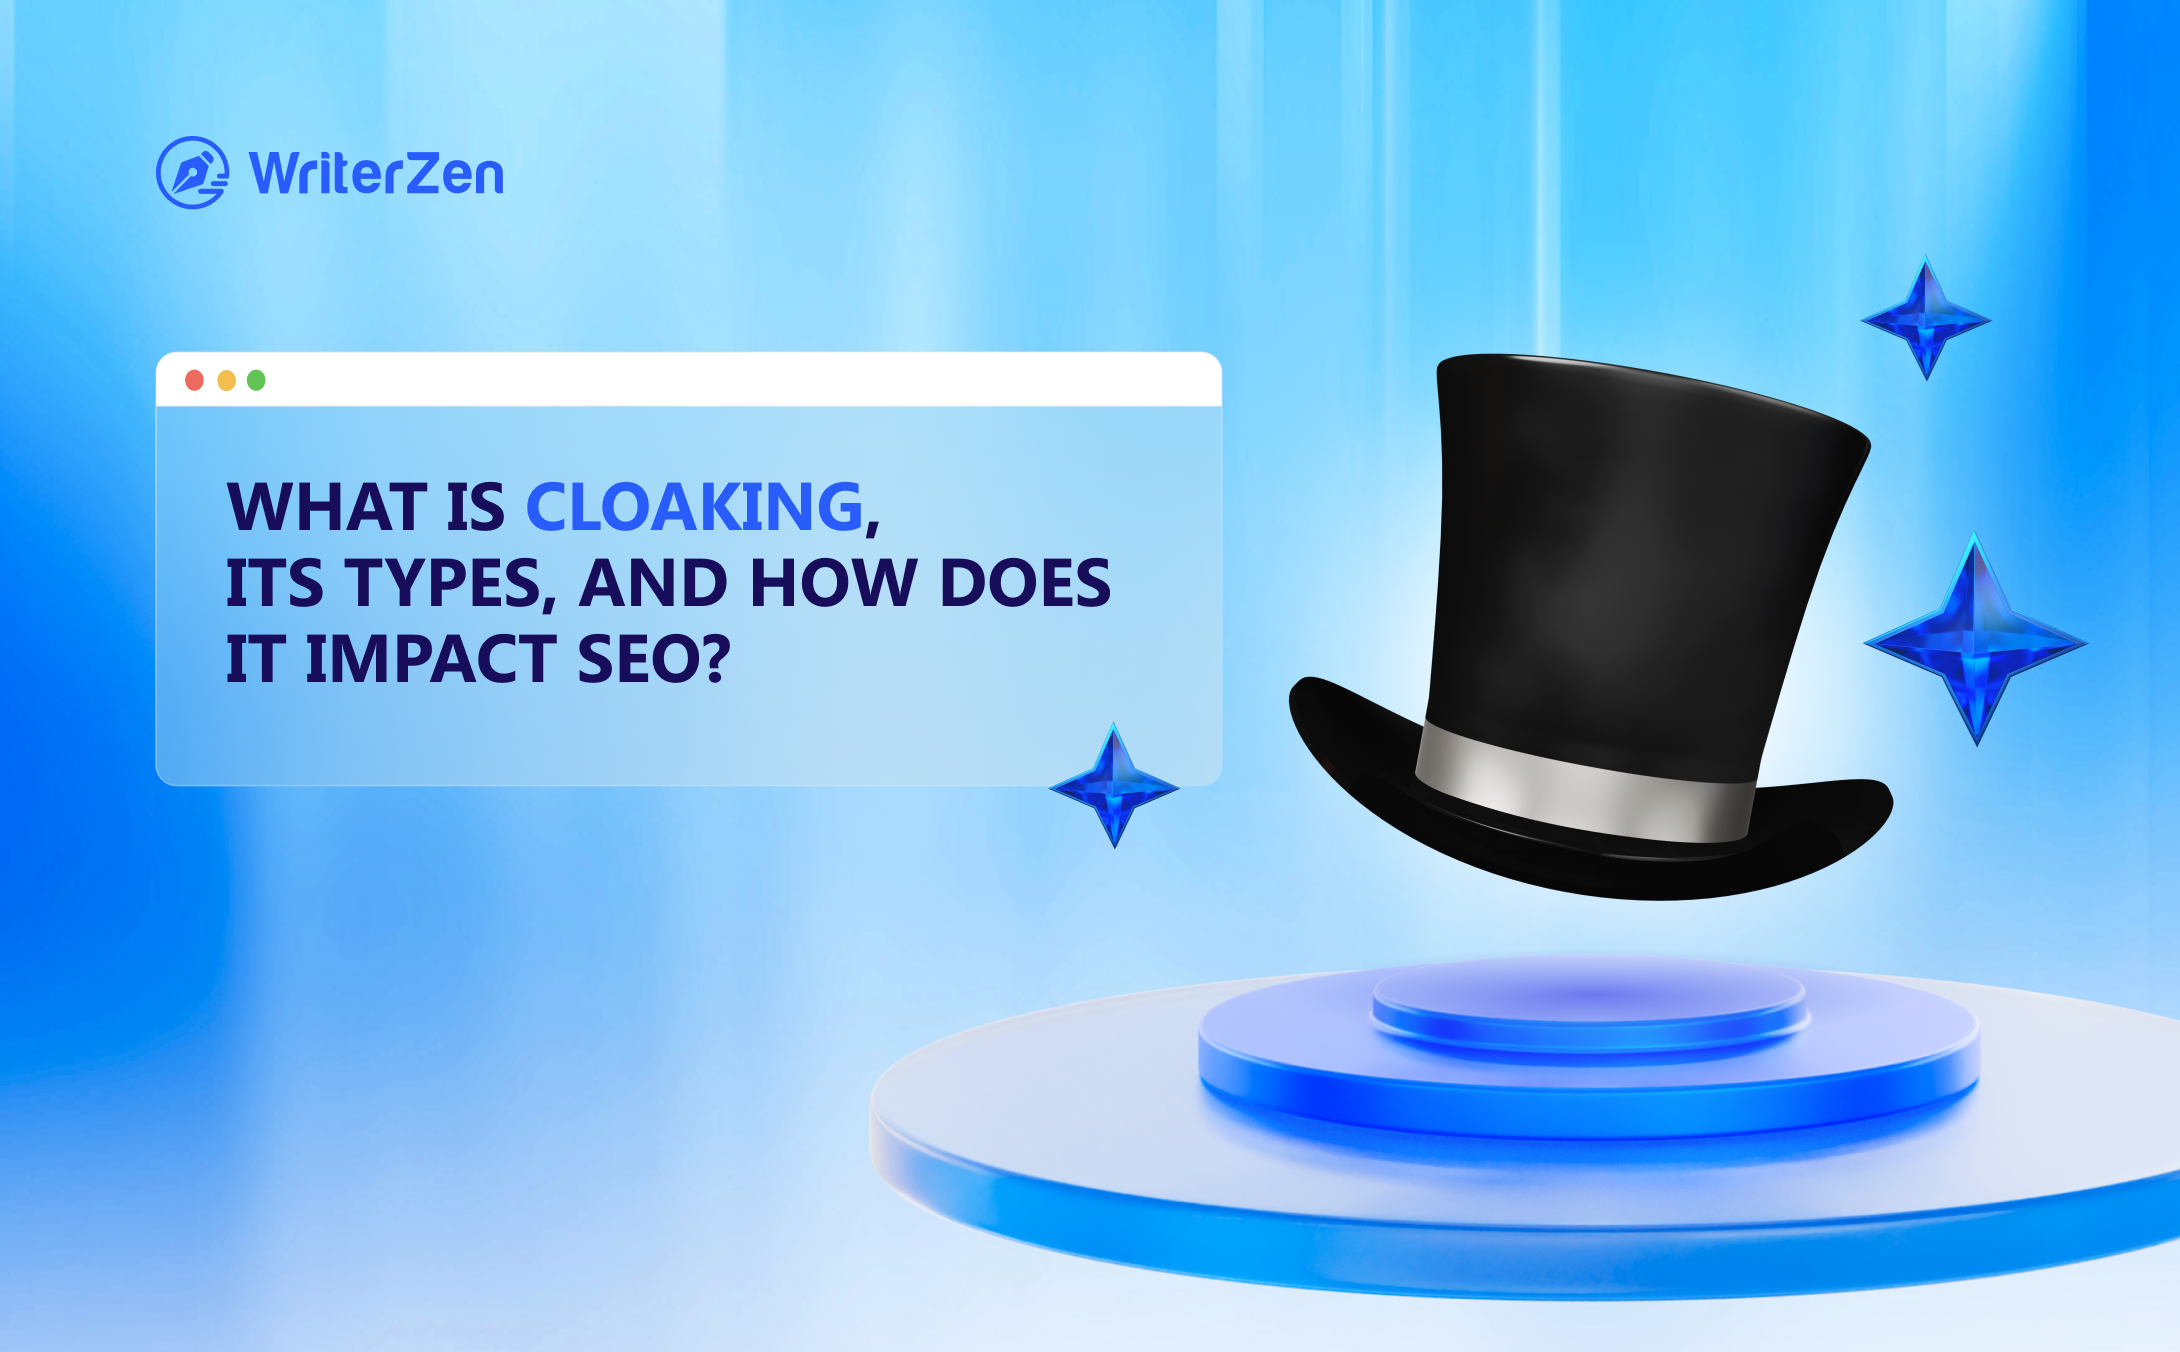 What Is Cloaking, Its Types, and How Does It Impact SEO?